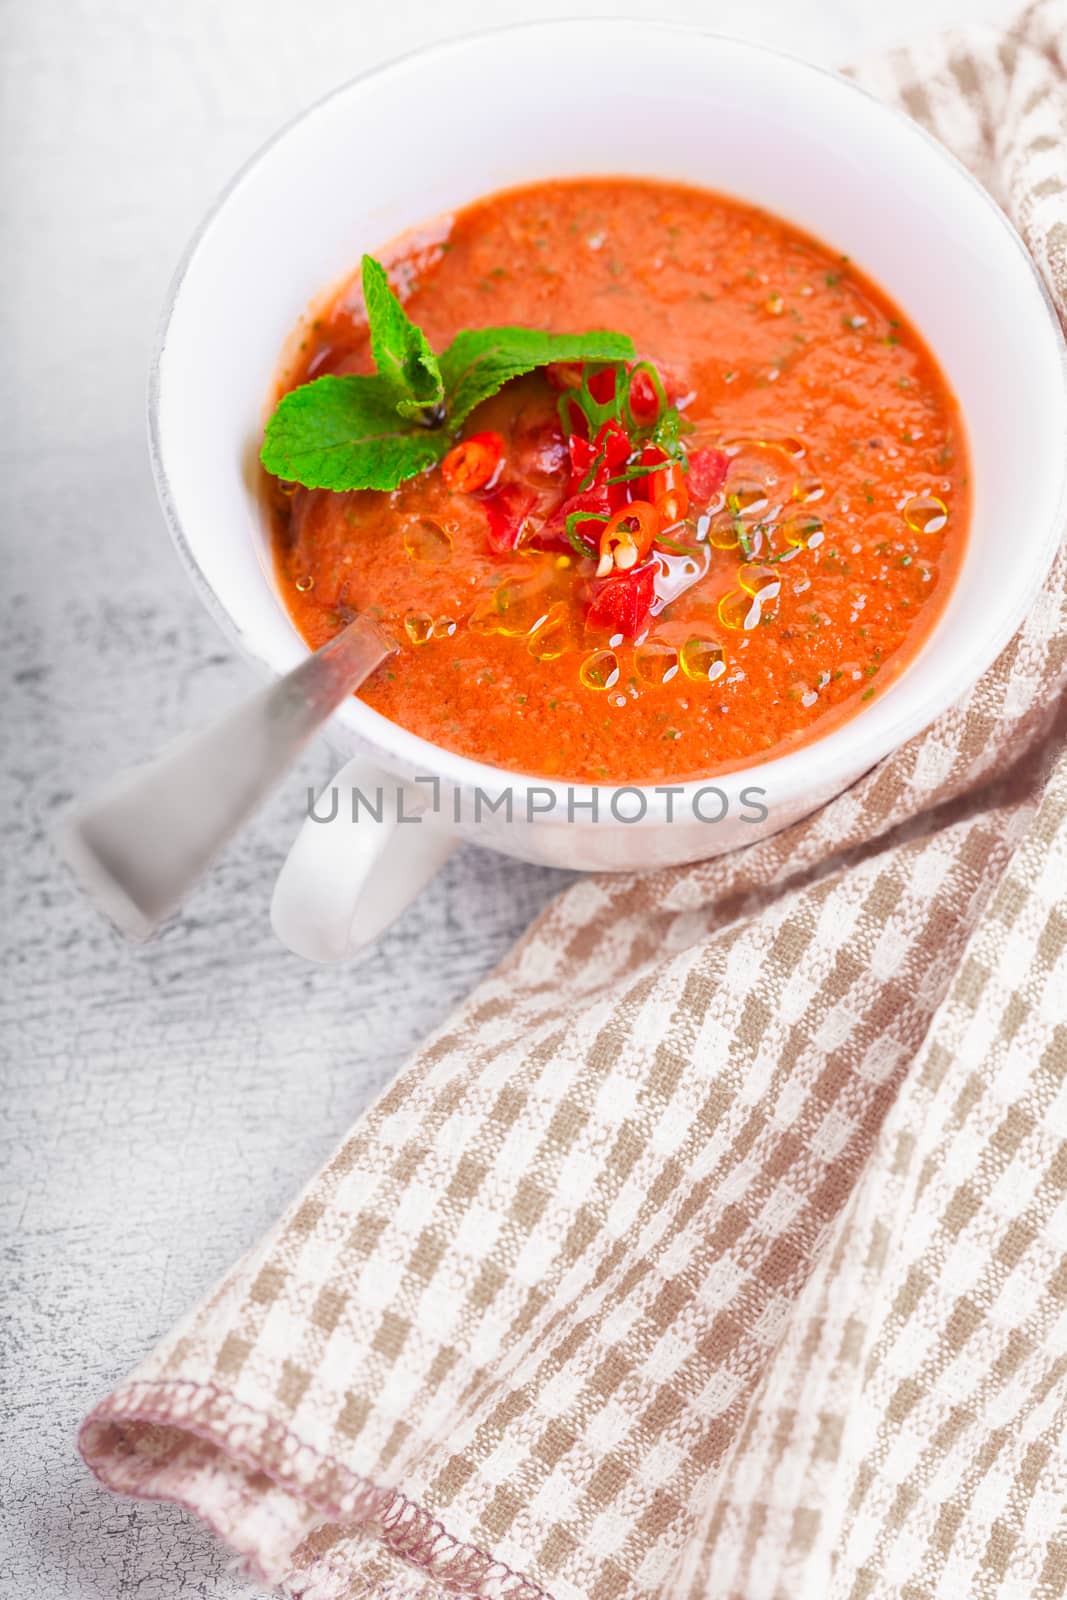 Bowl of fresh tomato soup gazpacho on the table